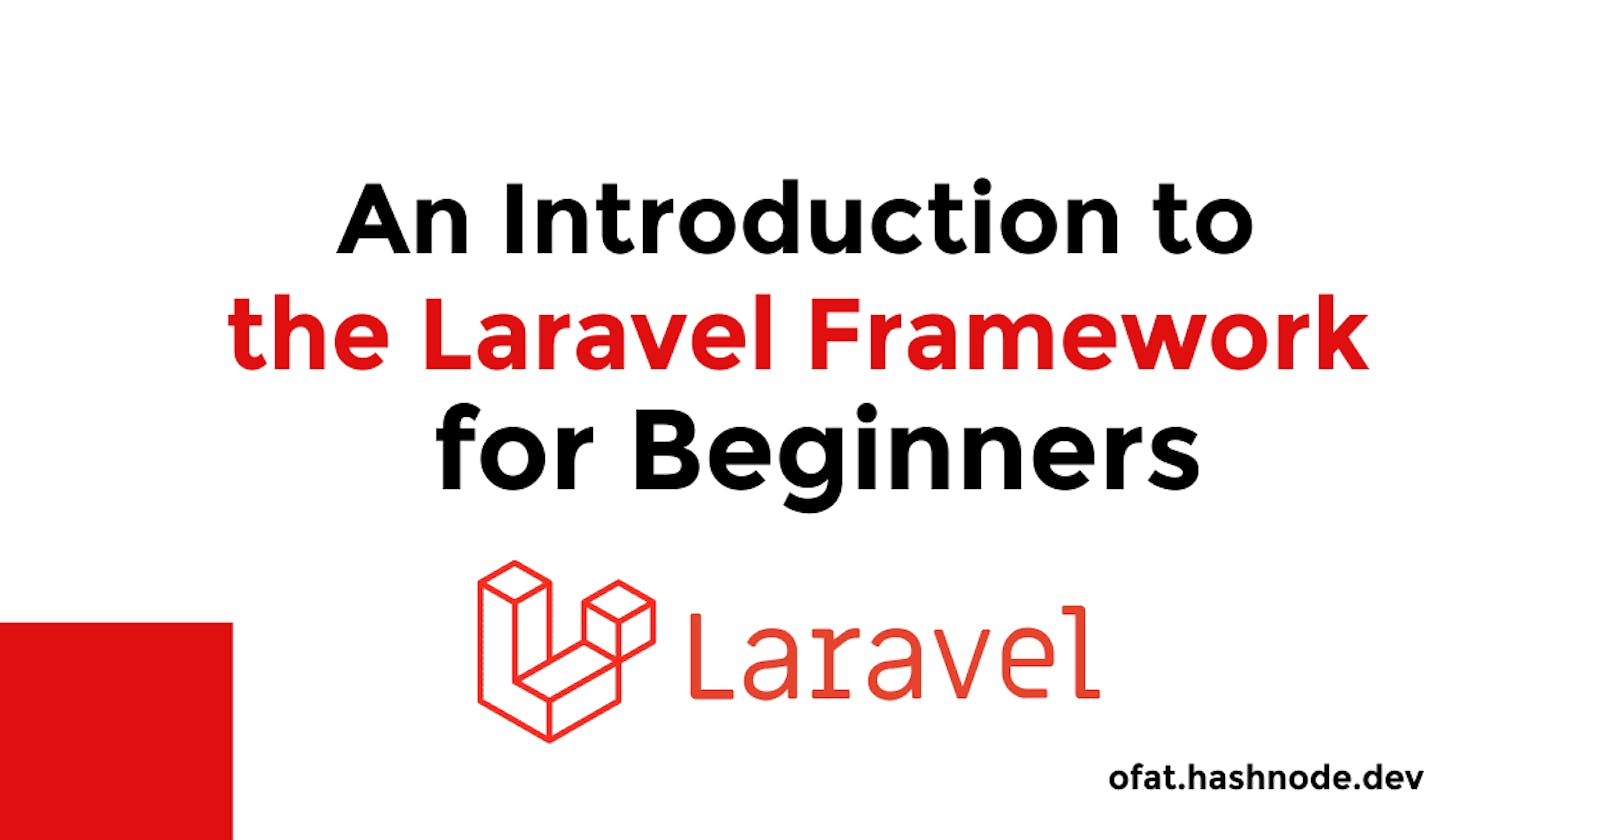 An introduction to the Laravel Framework